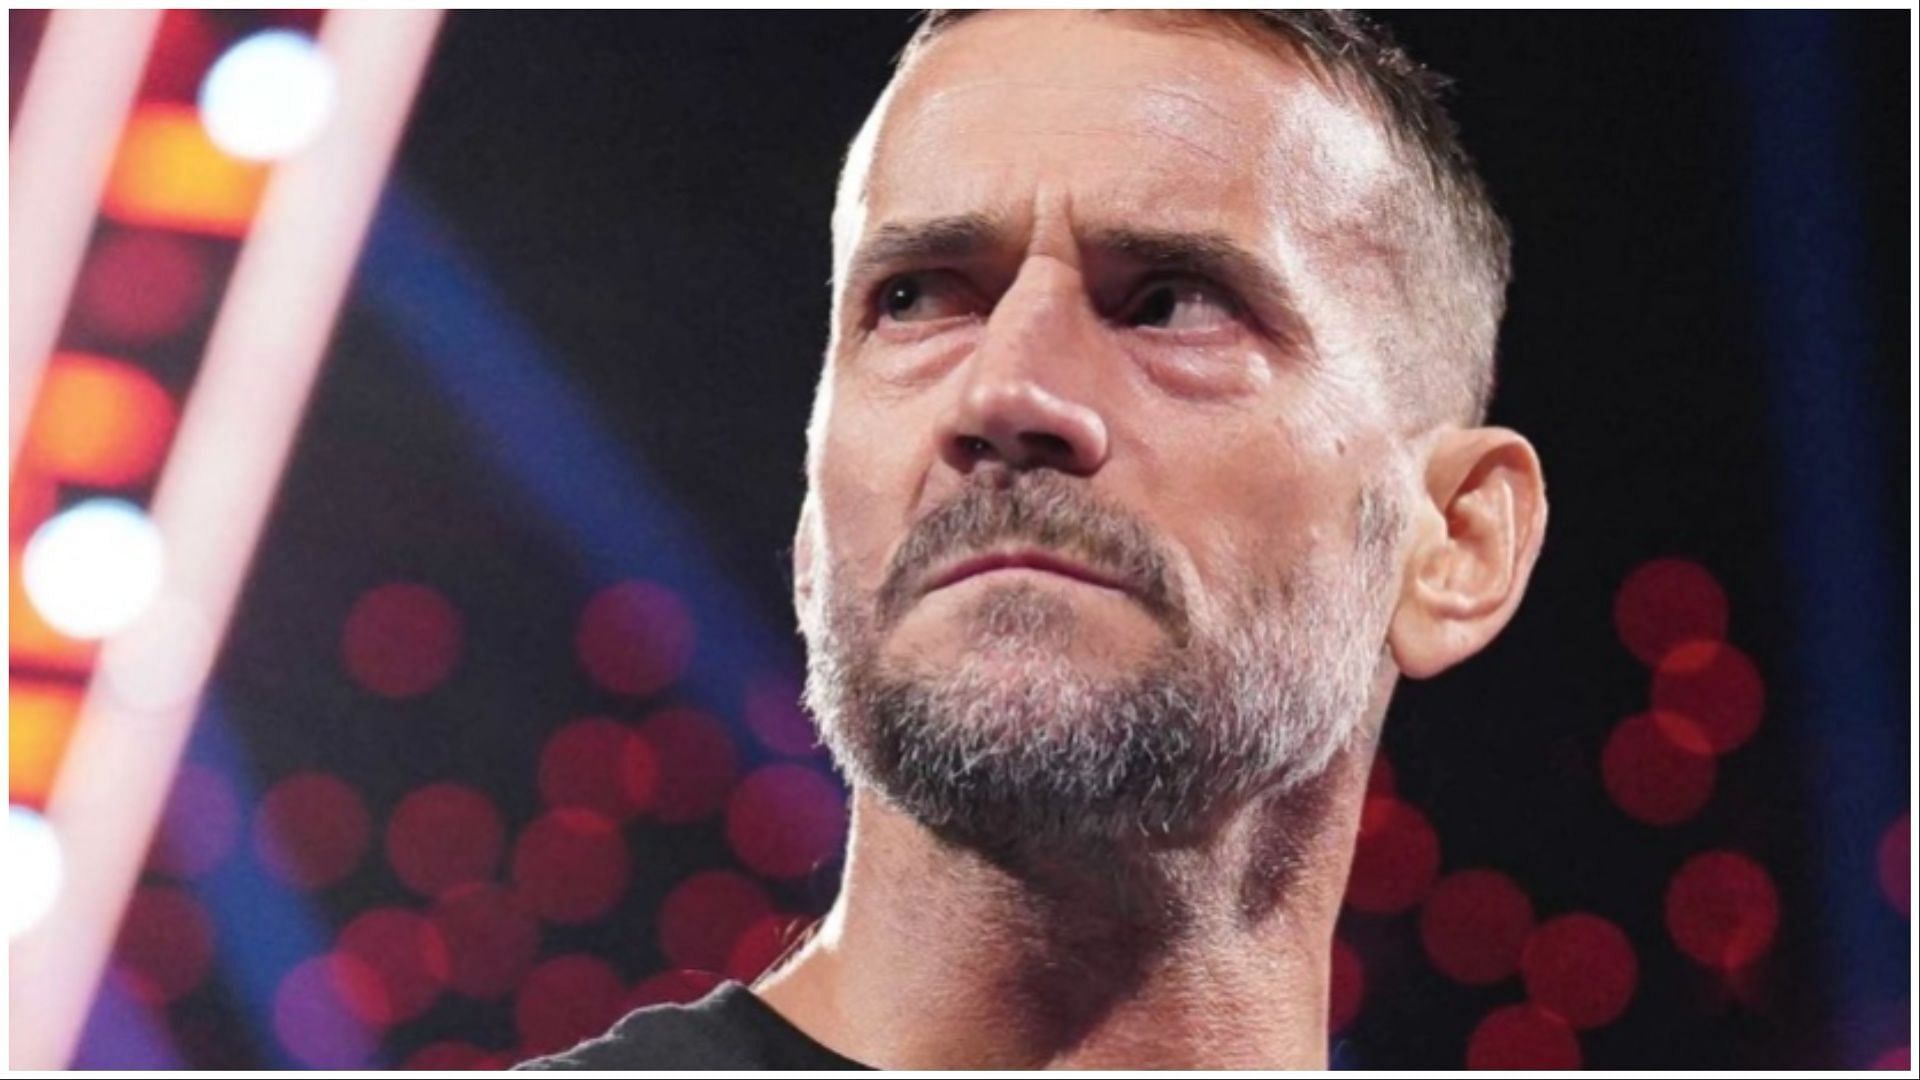 WWE Superstar CM Punk is one of the competitors at this year